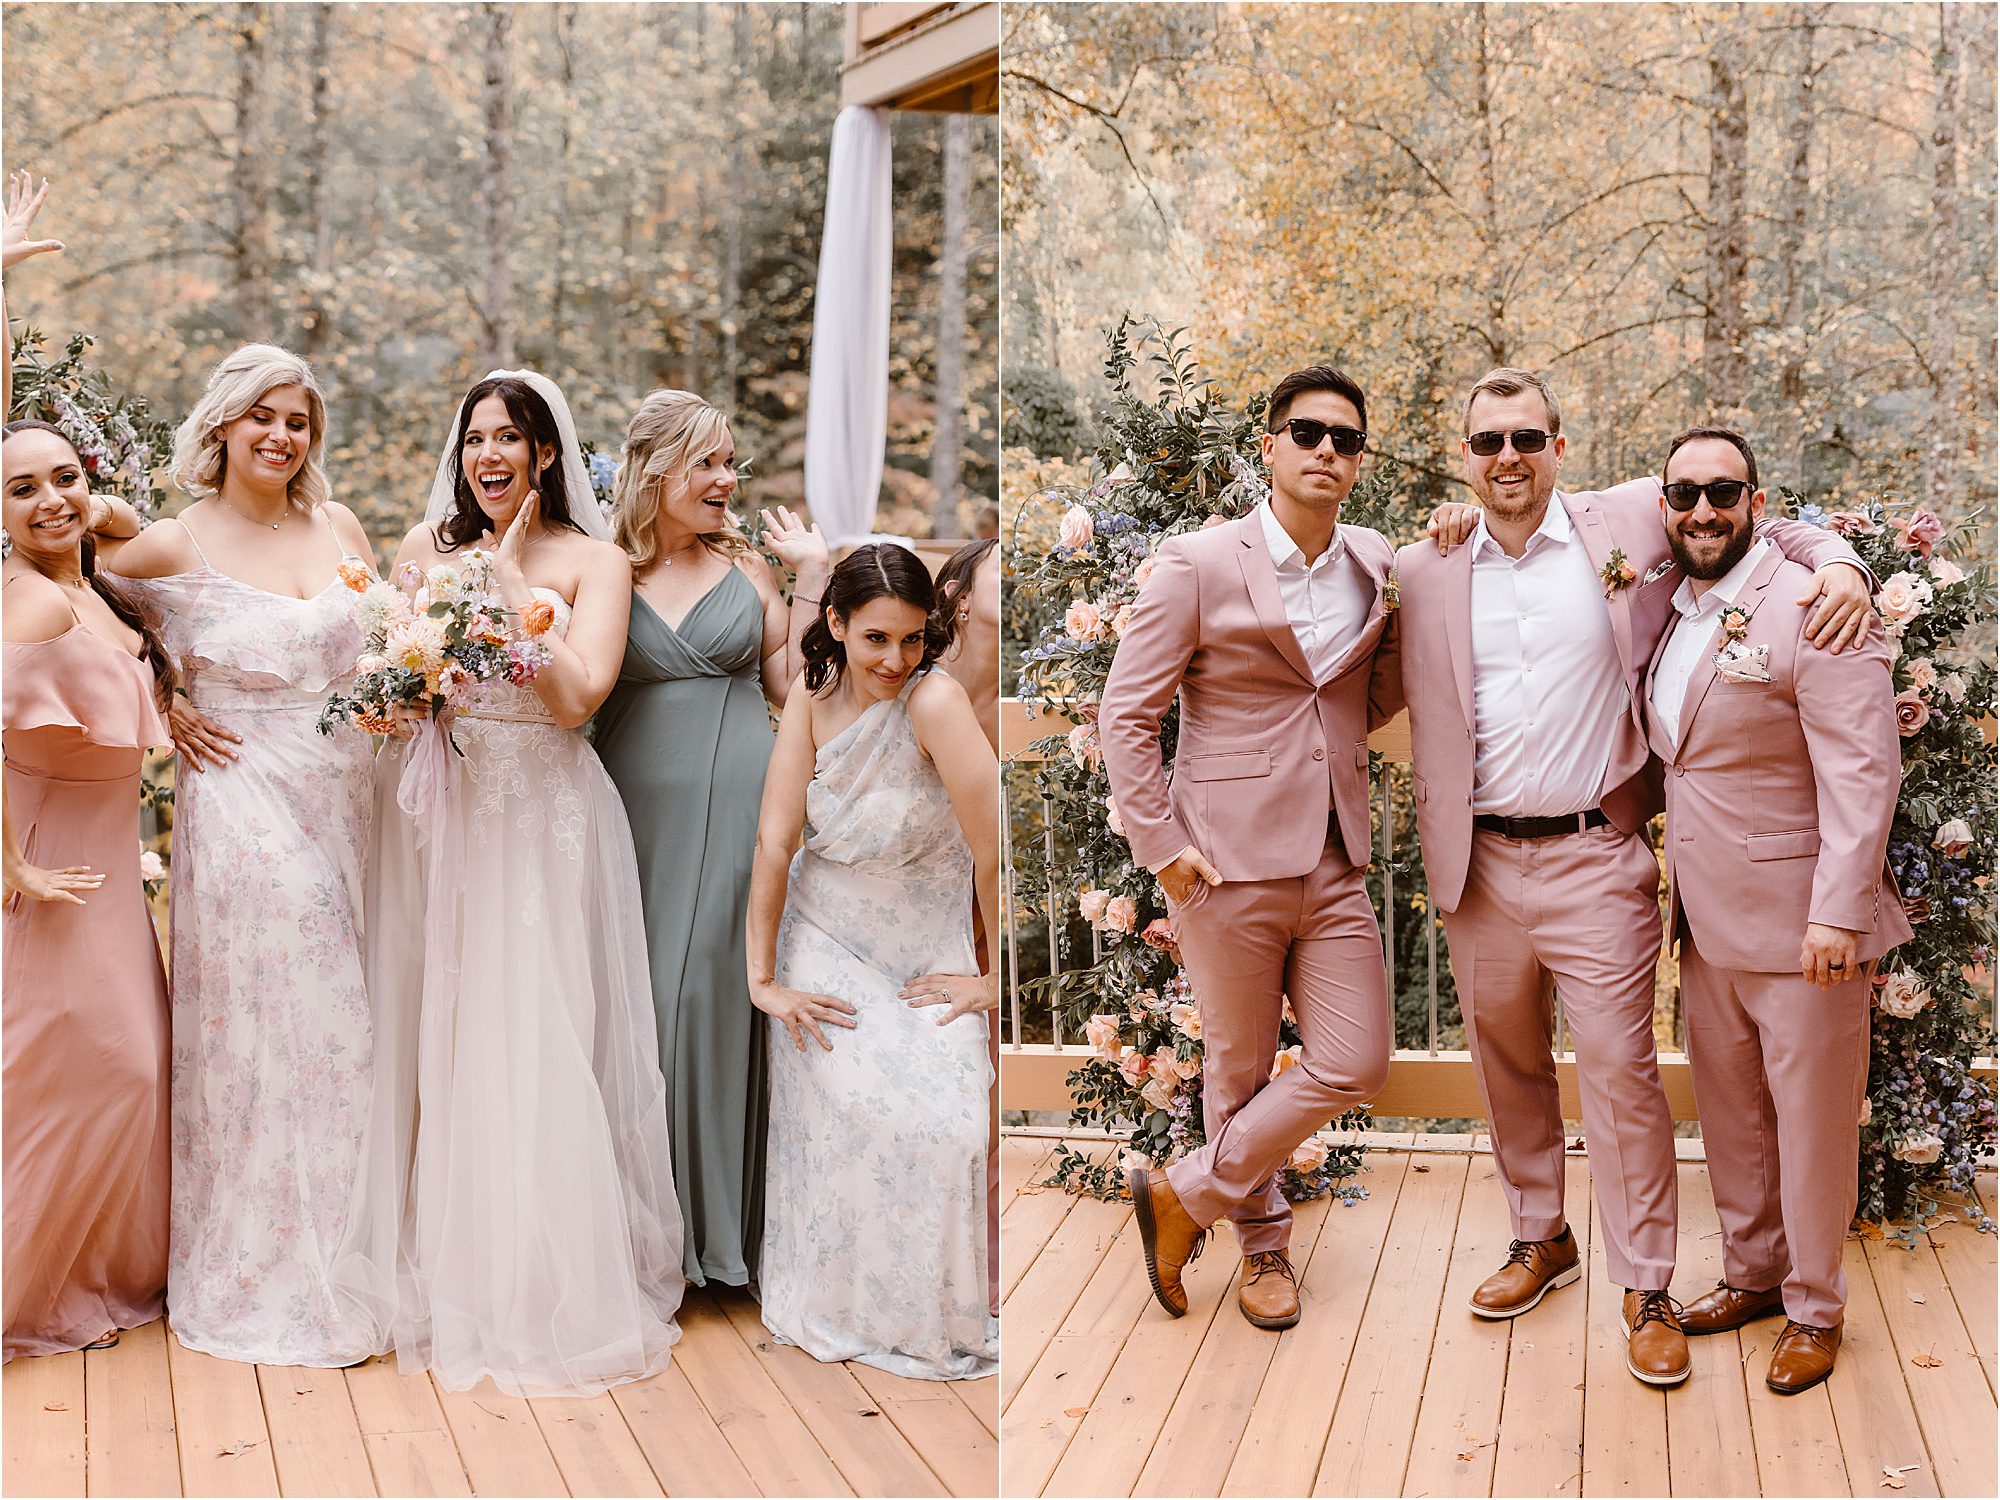 fun wedding photos with bridesmaids and groomsmen on private cabin deck